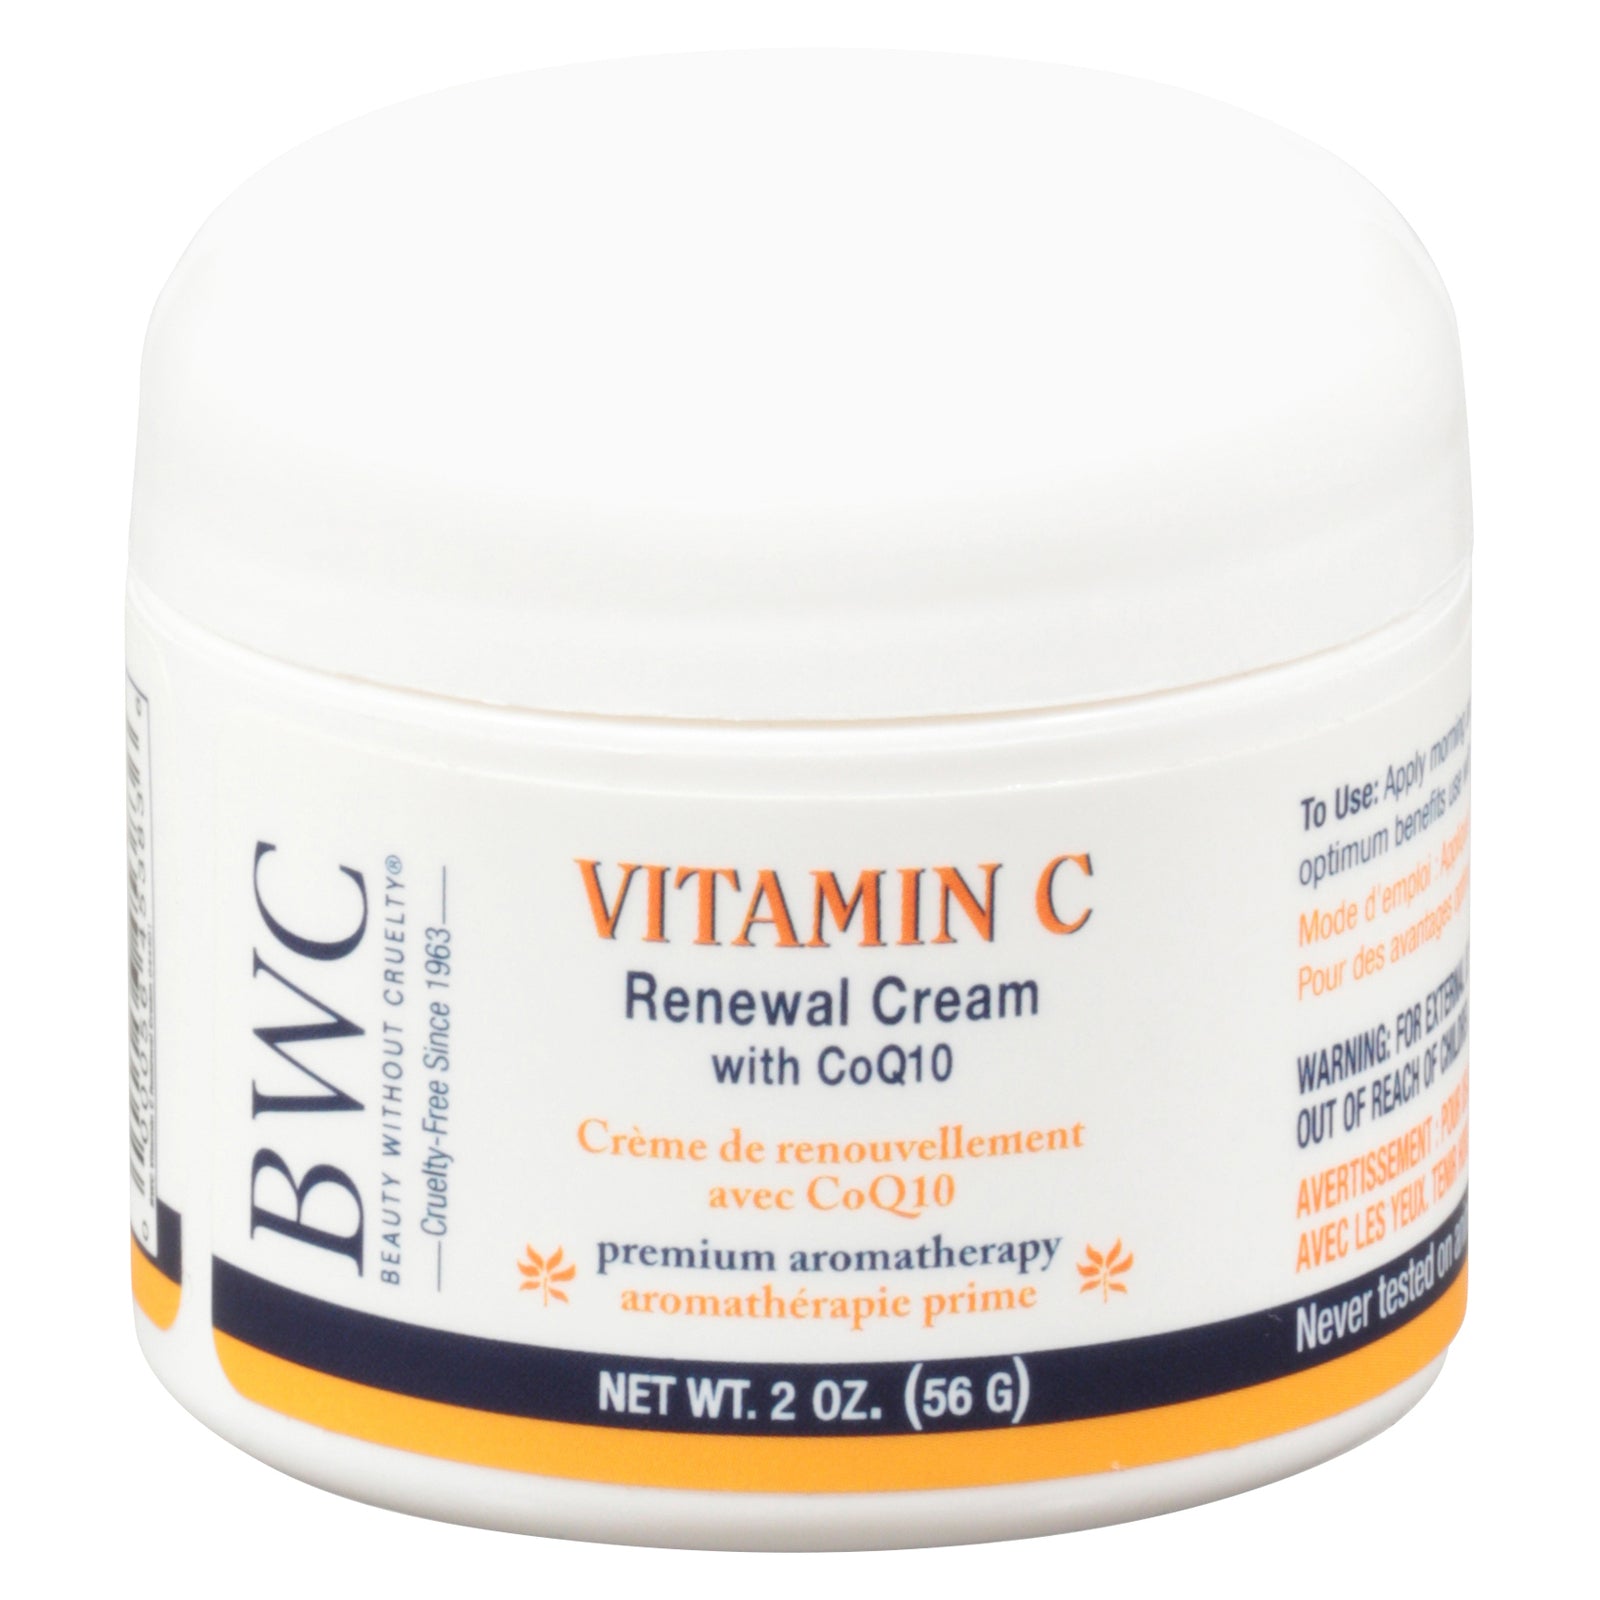 Beauty Without Cruelty Renewal Cream Vitamin C With Coq10 - 2 Oz